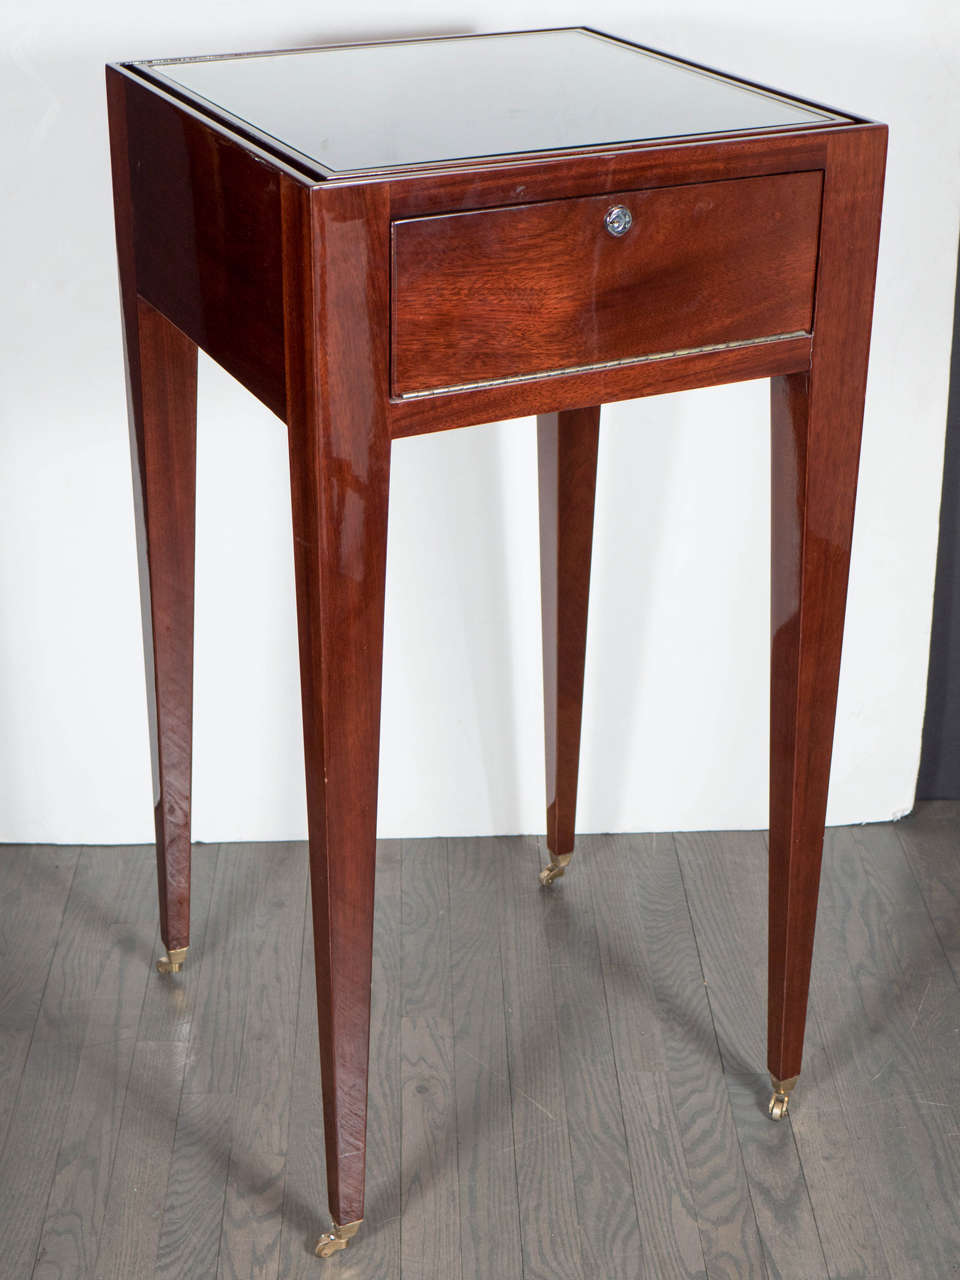 This elegant Art Deco Directoire style display case was realized in France, circa 1930. It features a rectilinear body with tapered legs in fine Mahogany sitting on brass castors. Additionally, it offers one pull out drawer, which is lockable and